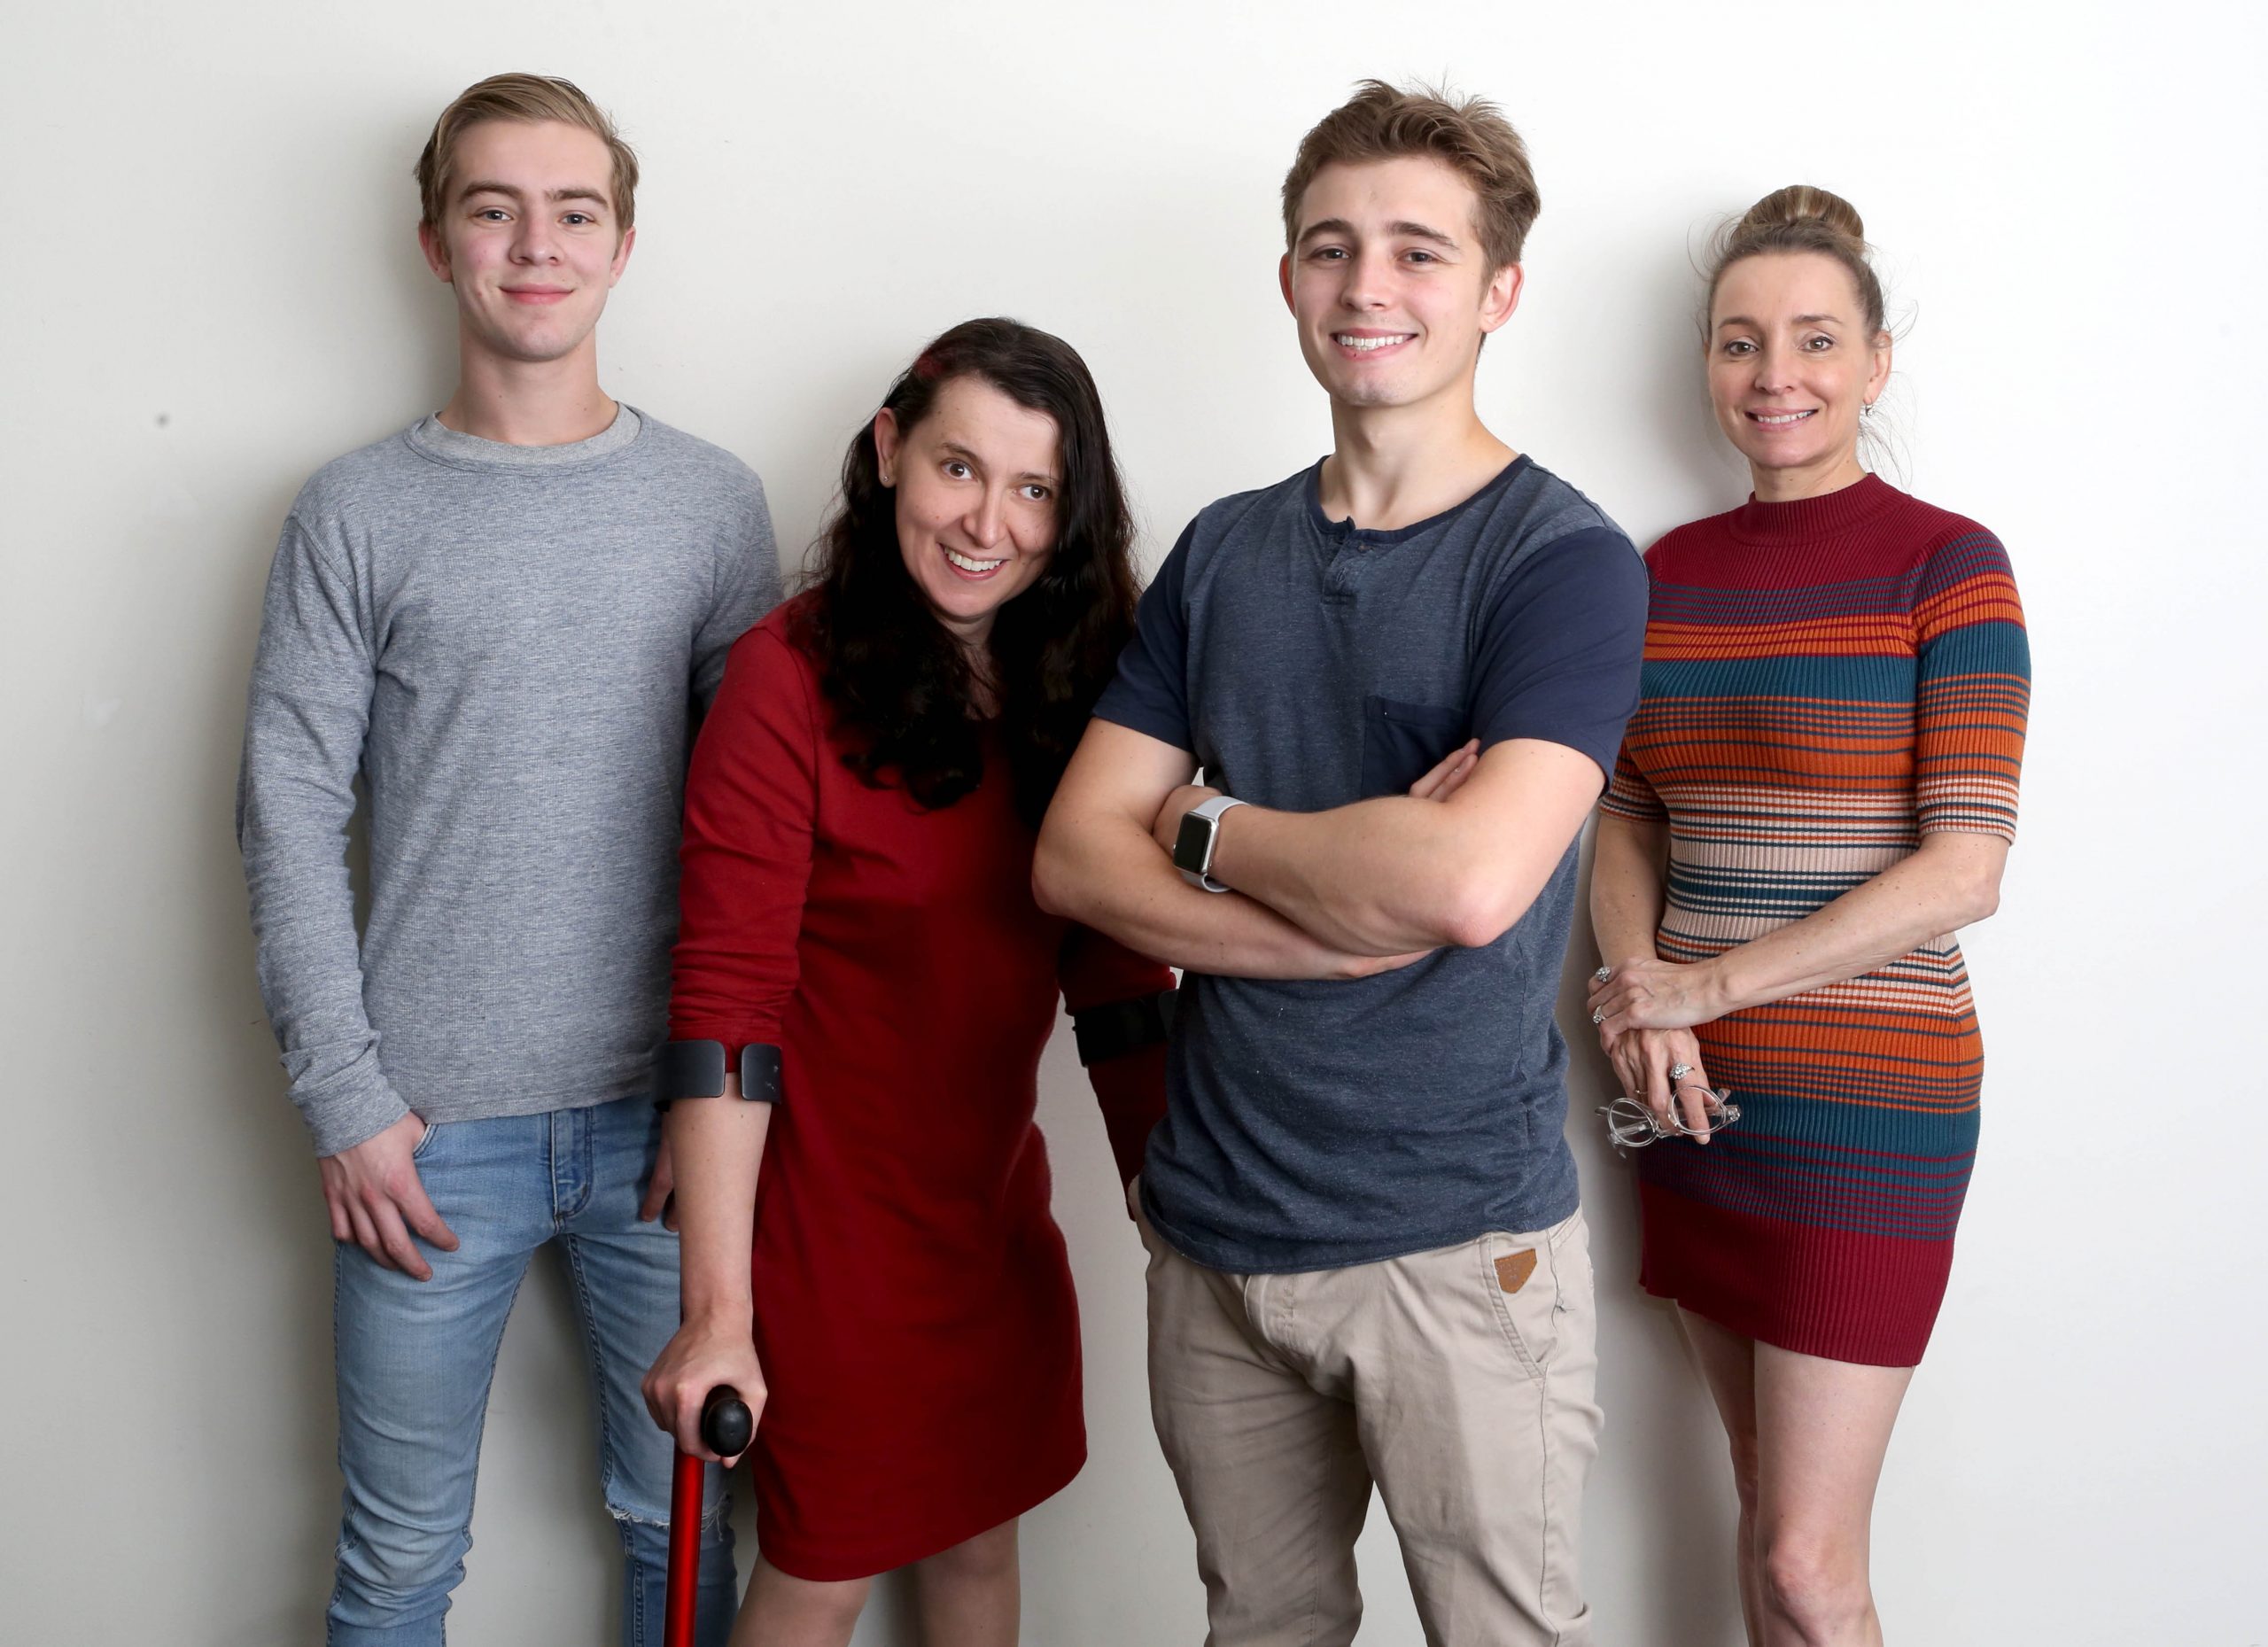 The Intimate Encounters Team stand in a line smiling camera against a white background